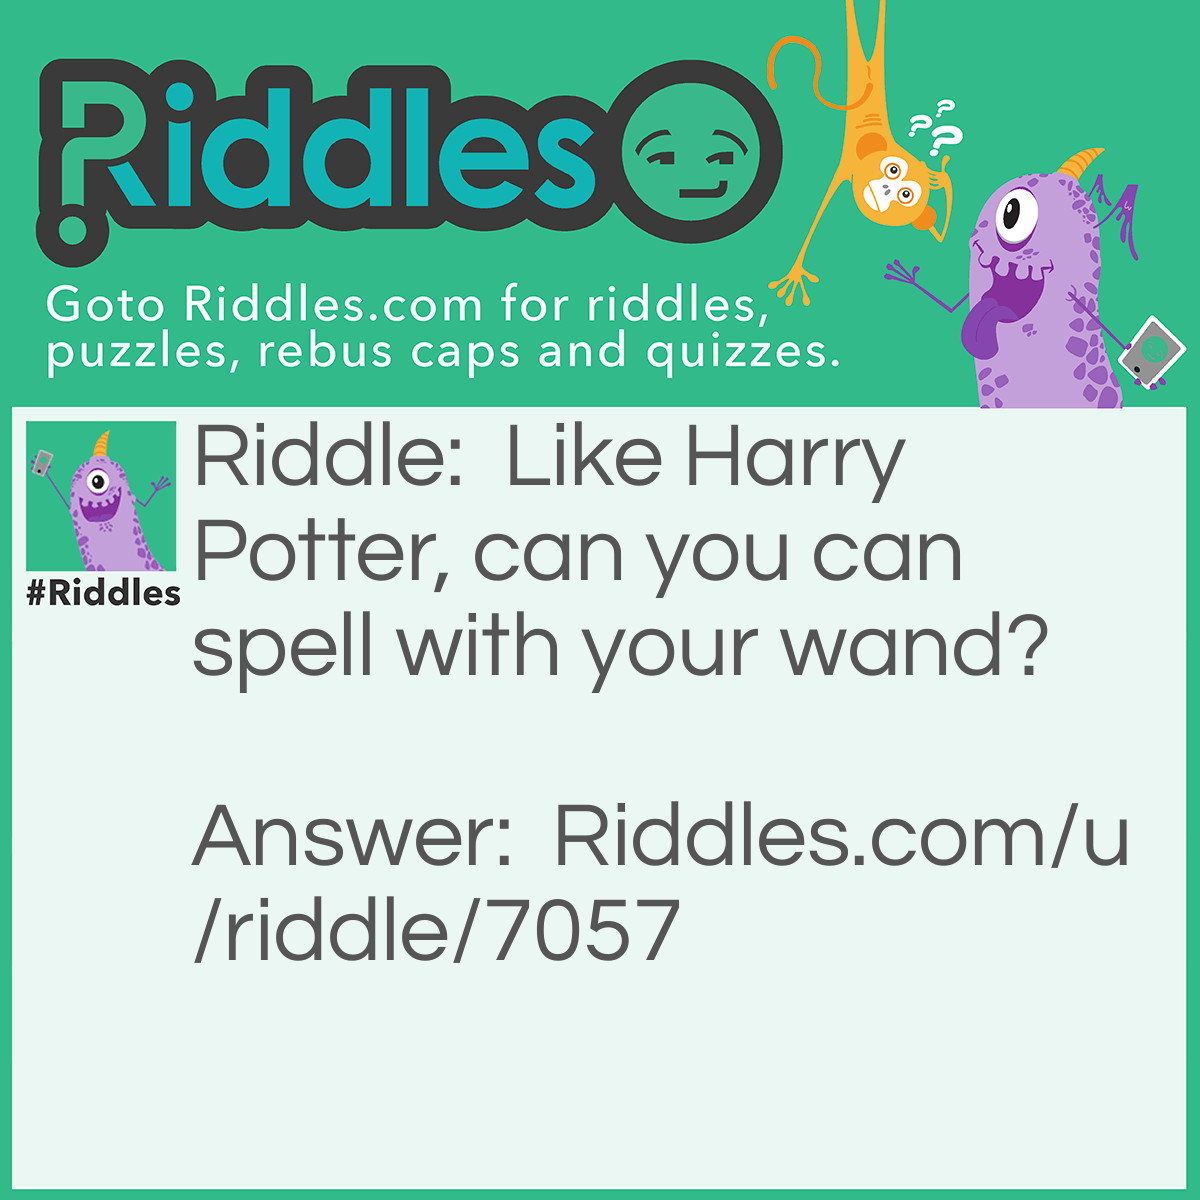 Riddle: Like Harry Potter, can you can spell with your wand? Answer: Yes, just write the words "with your wand". Unless you're illiterate, of course.